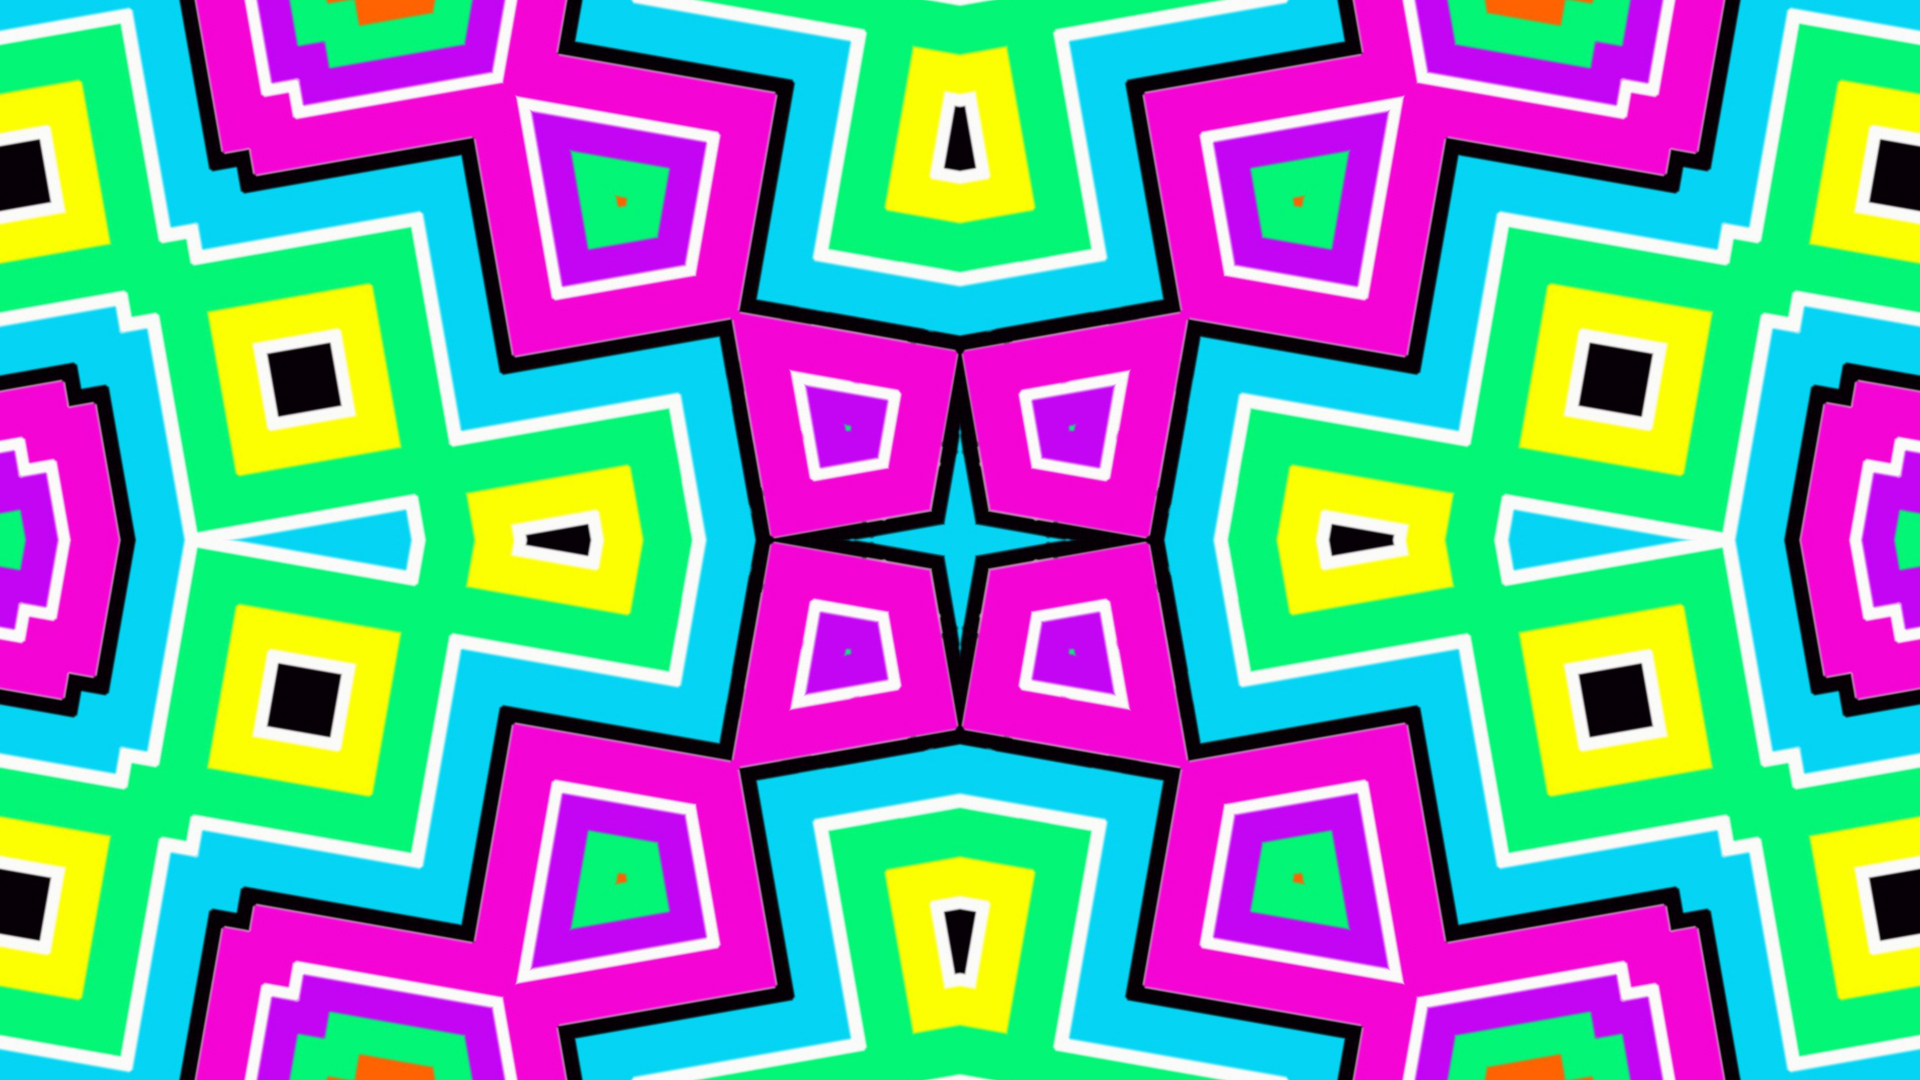 Colors Kaleidoscope Pattern Shapes Colorful 1920x1080